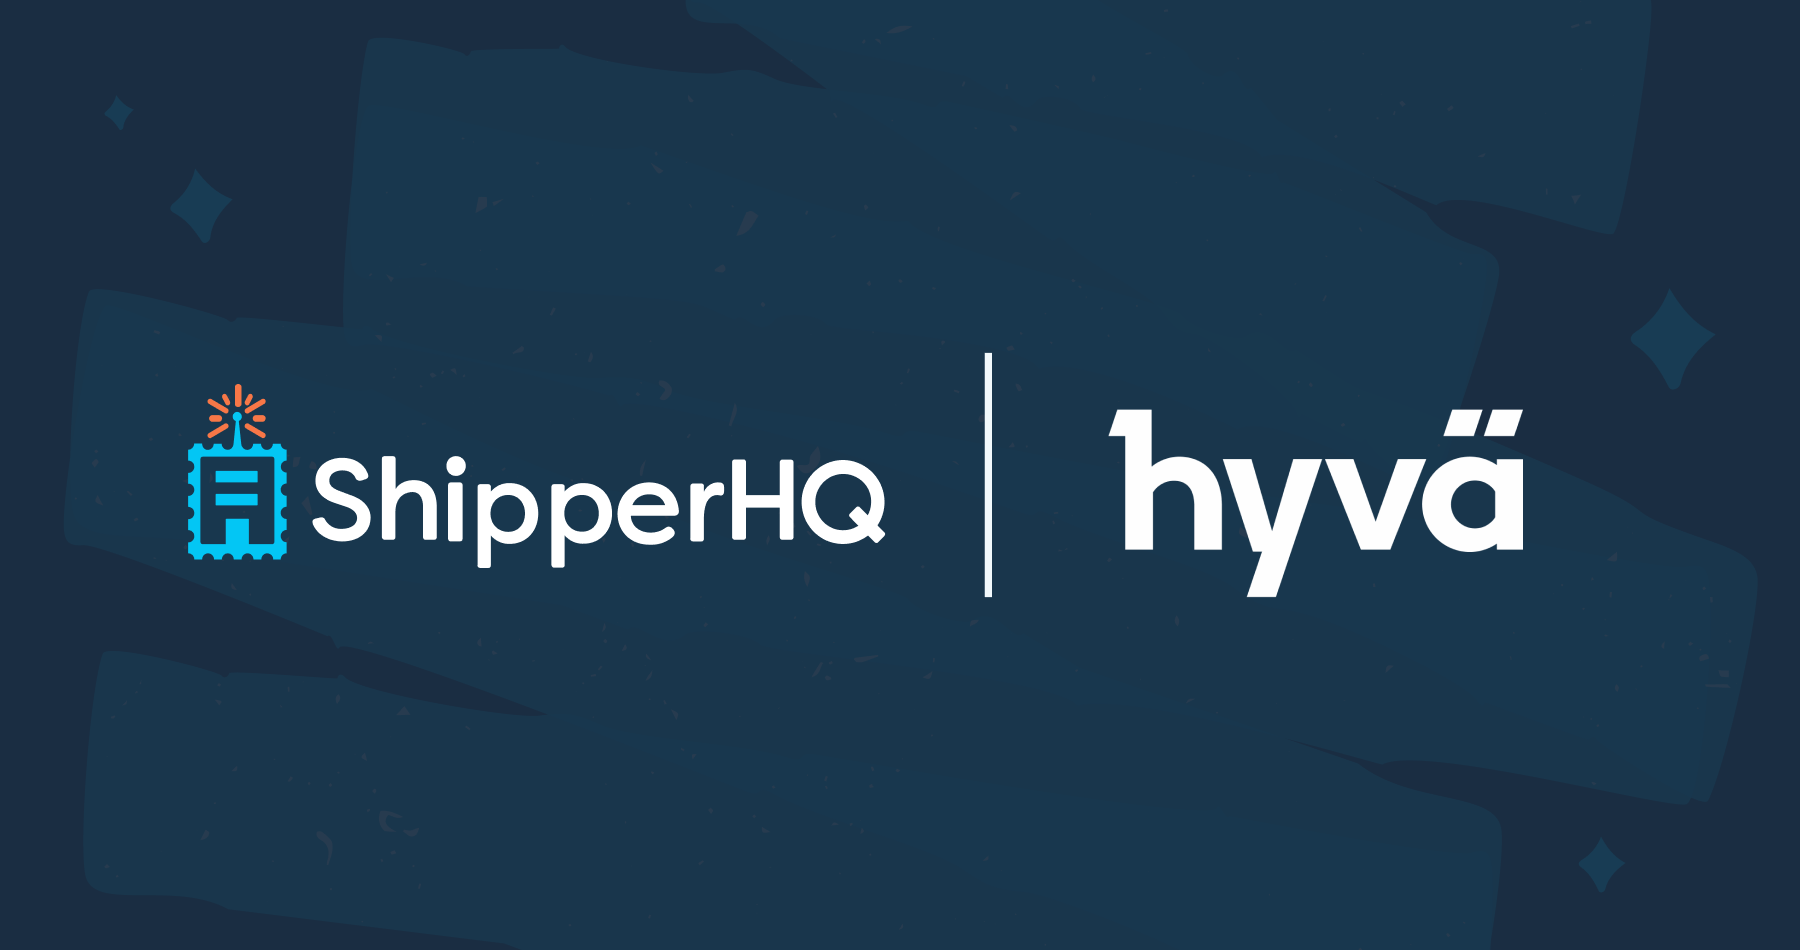 ShipperHQ and Hyvä Join Forces to Redefine eCommerce Excellence